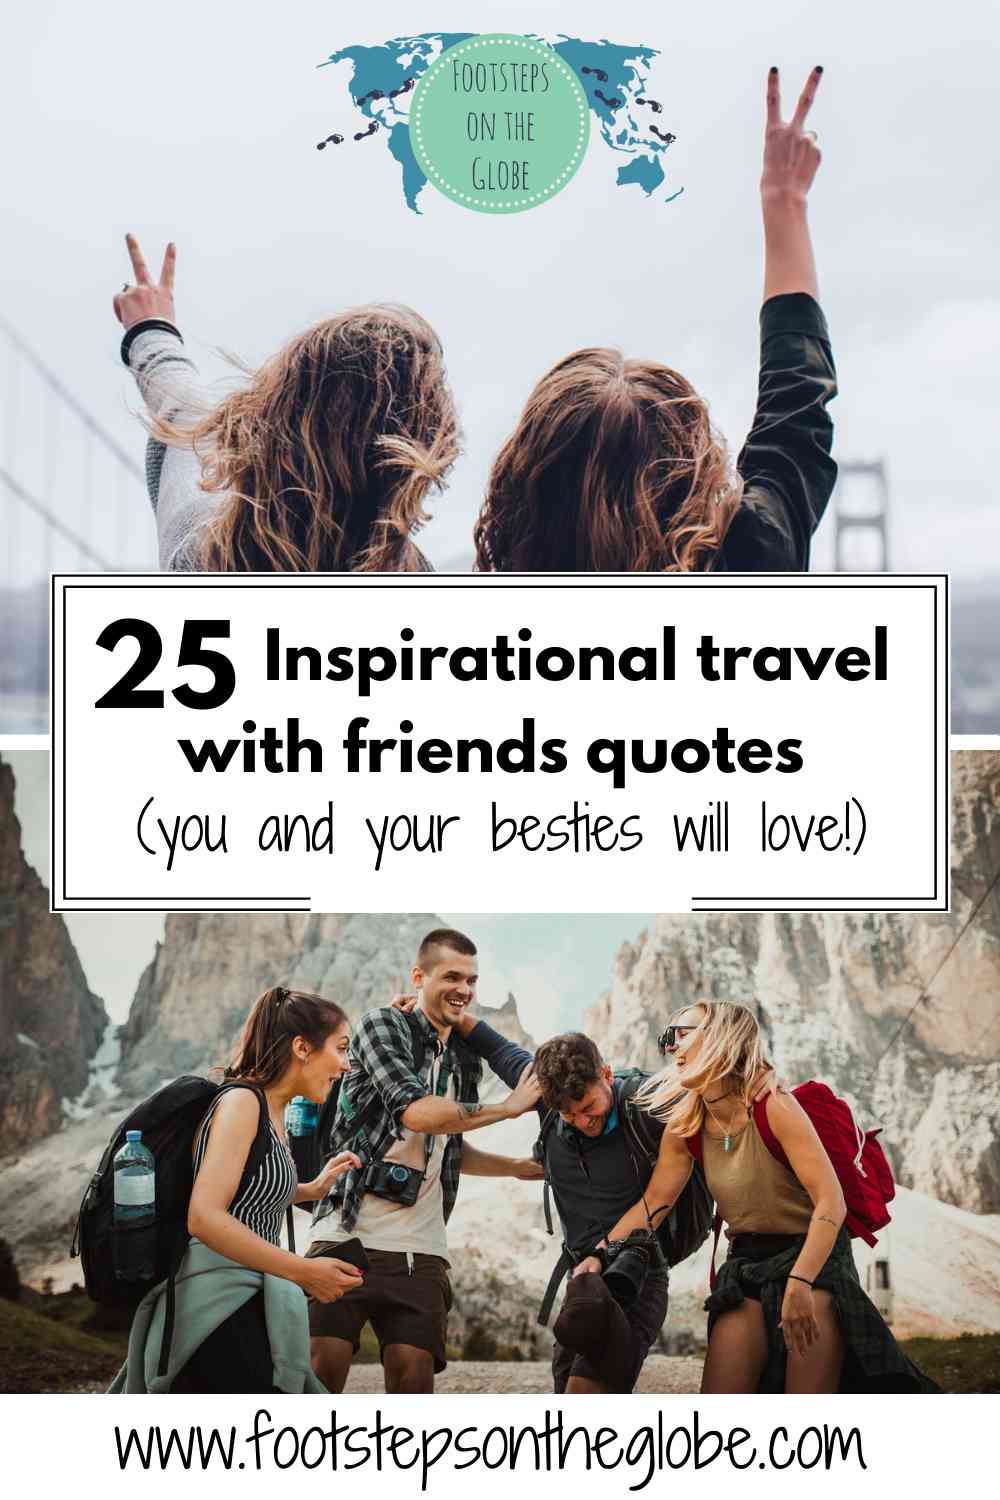 Pinterest image travel with friends quote Footsteps on the Globe